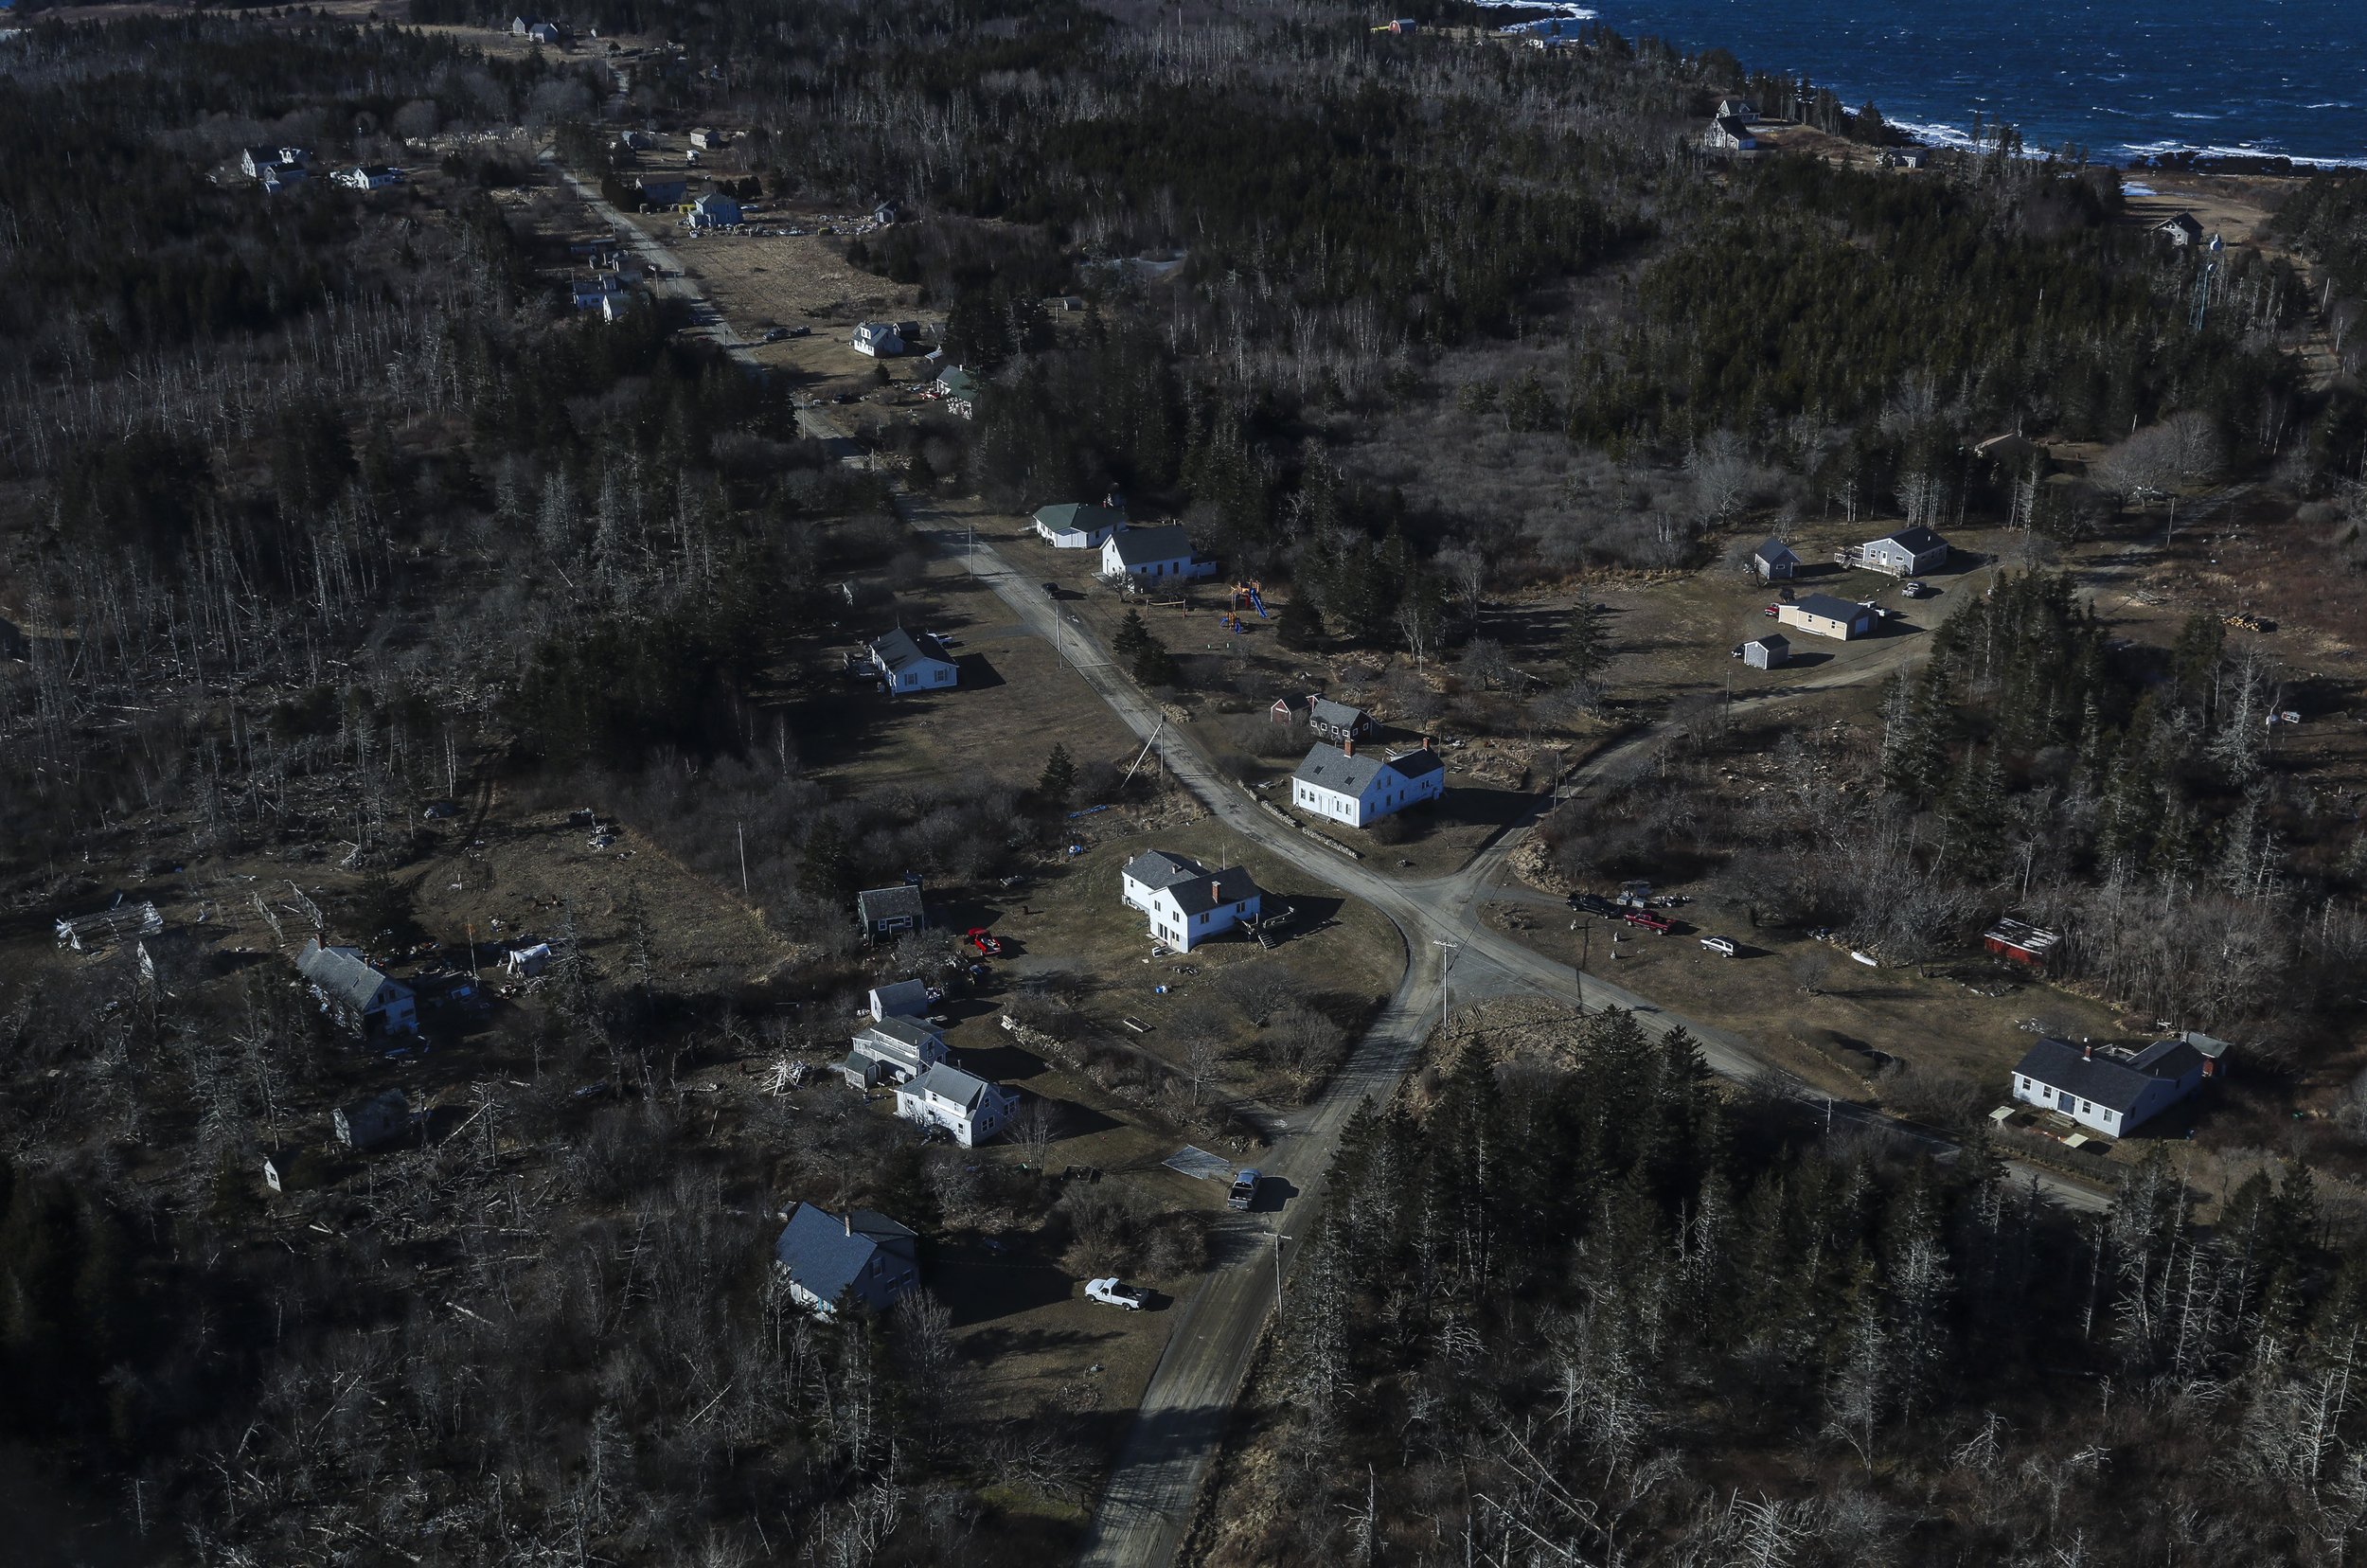  The main intersection of Matinicus where the school and town hall are located on March 3, 2021. The island is 20 miles off the Maine coast. The mission chartered a small, single-prop plane for a wind-tossed ride to the short, dirt runway at Matinicu